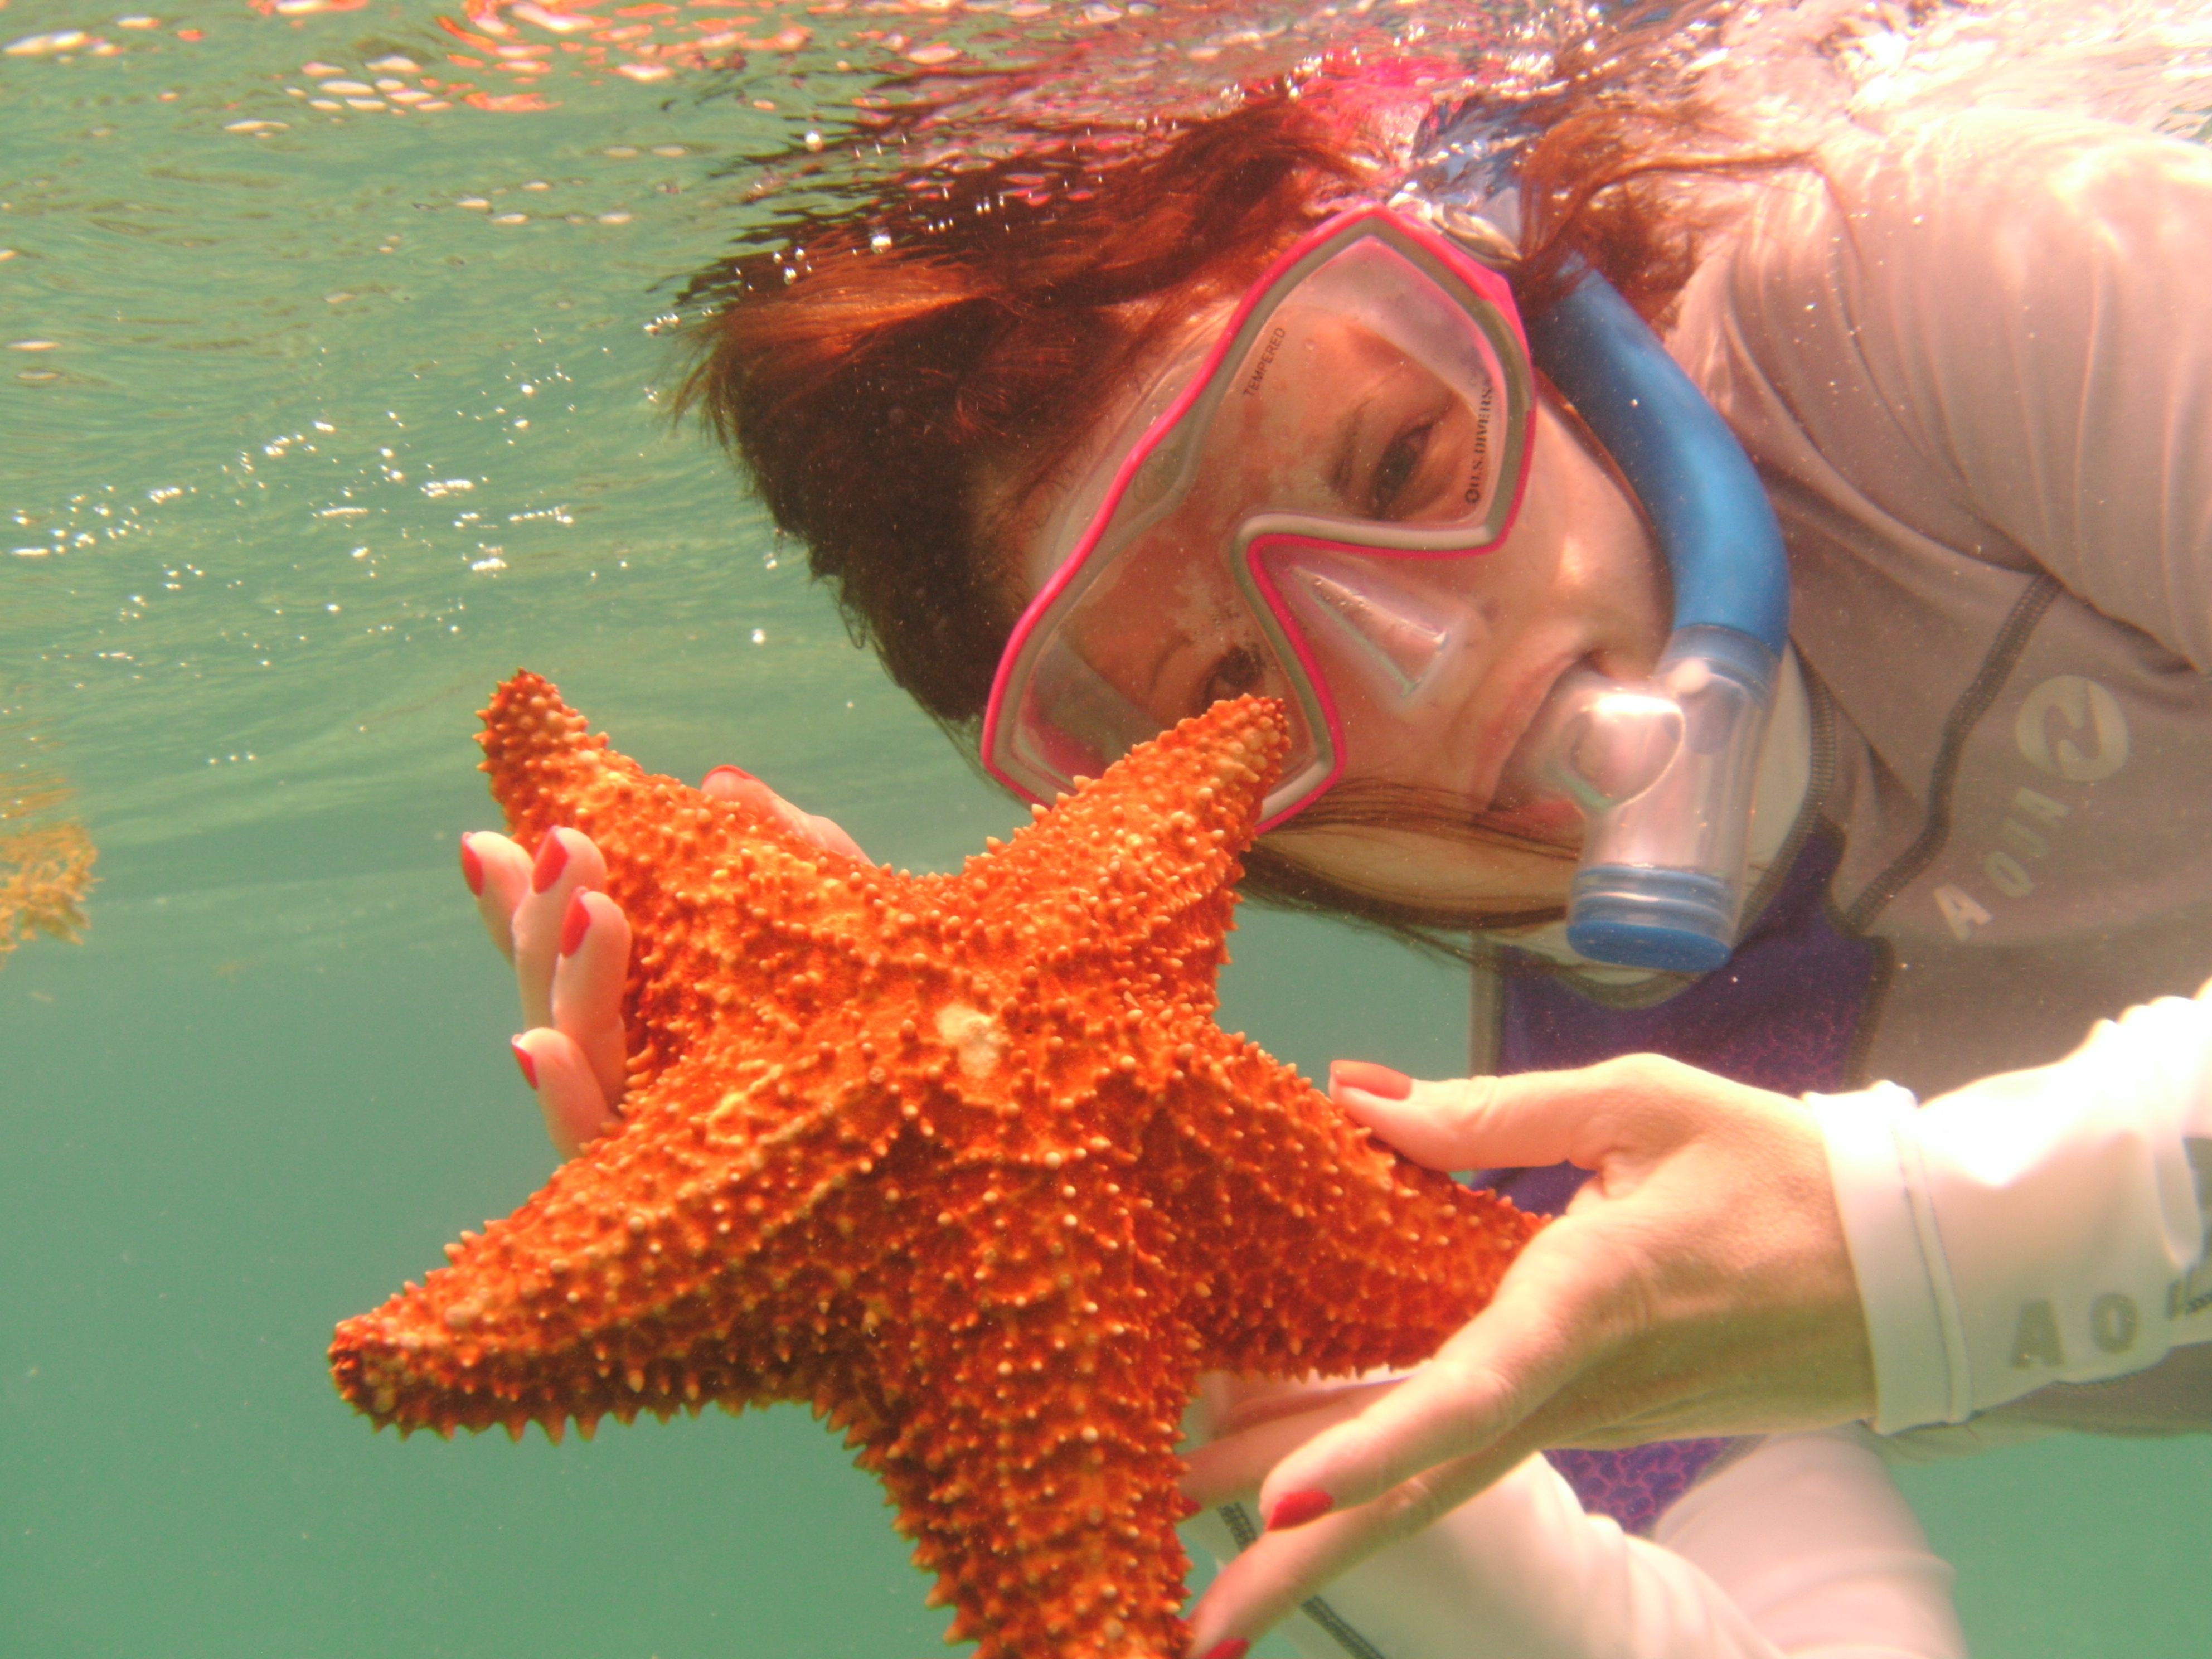 USI Snorkeler shows off a starfish in Belize